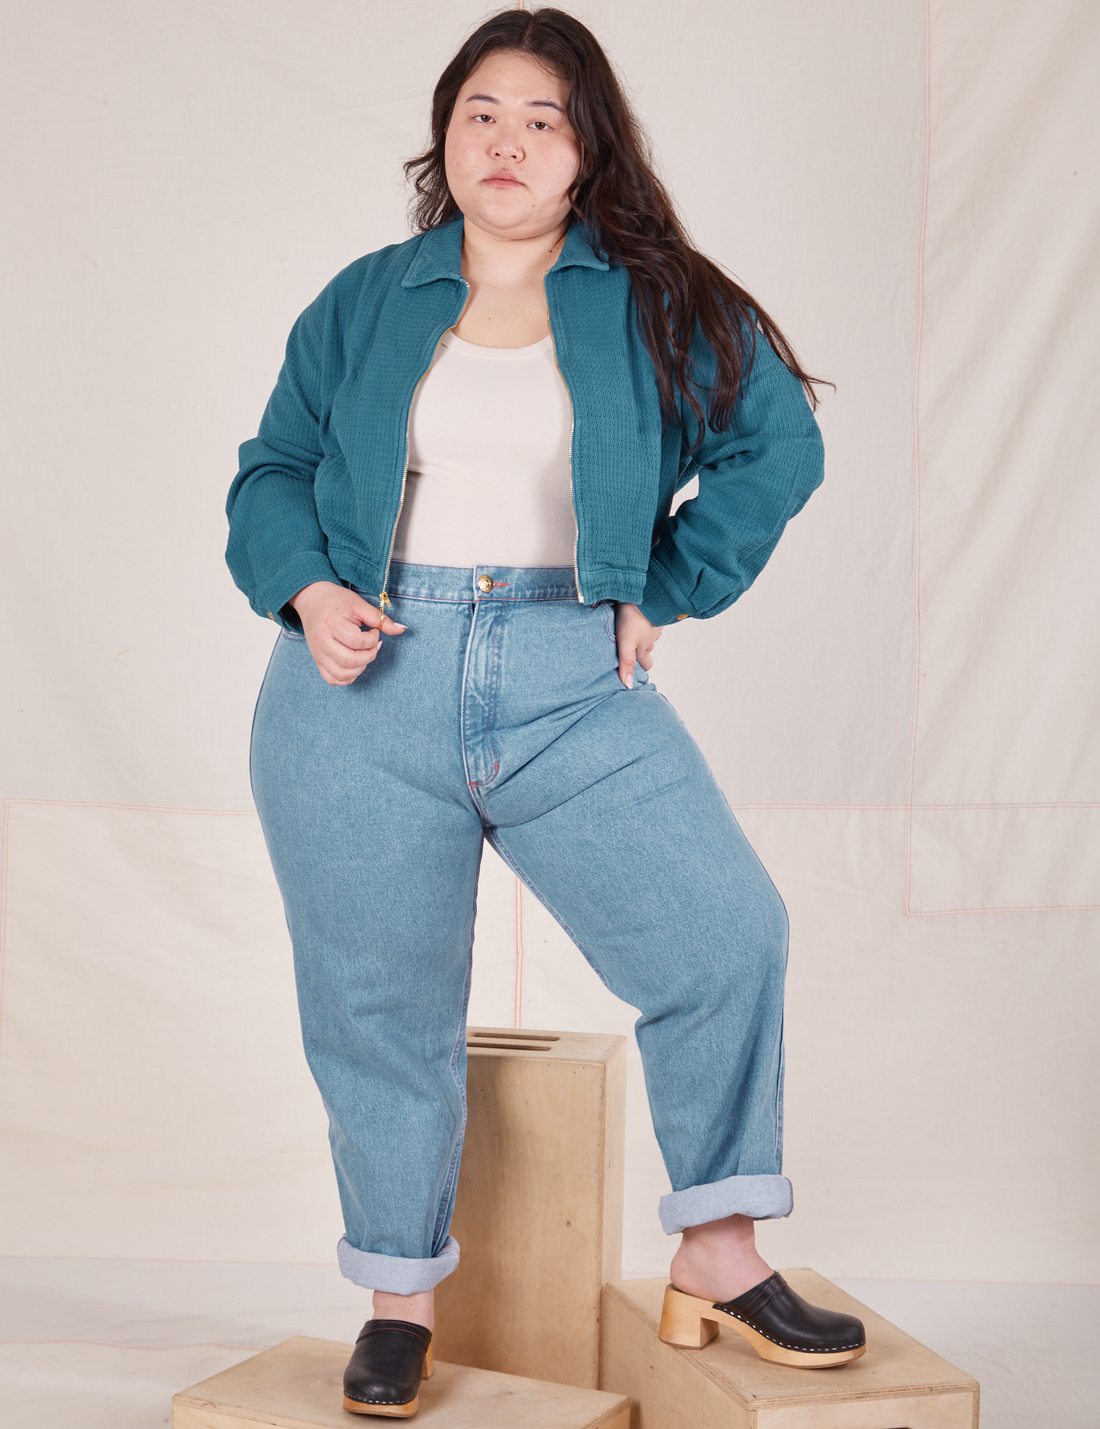 Ashley is standing on wooden crates wearing the Ricky Jacket in Marine Blue, a vintage off-white Tank Top underneath and light wash Frontier Jeans